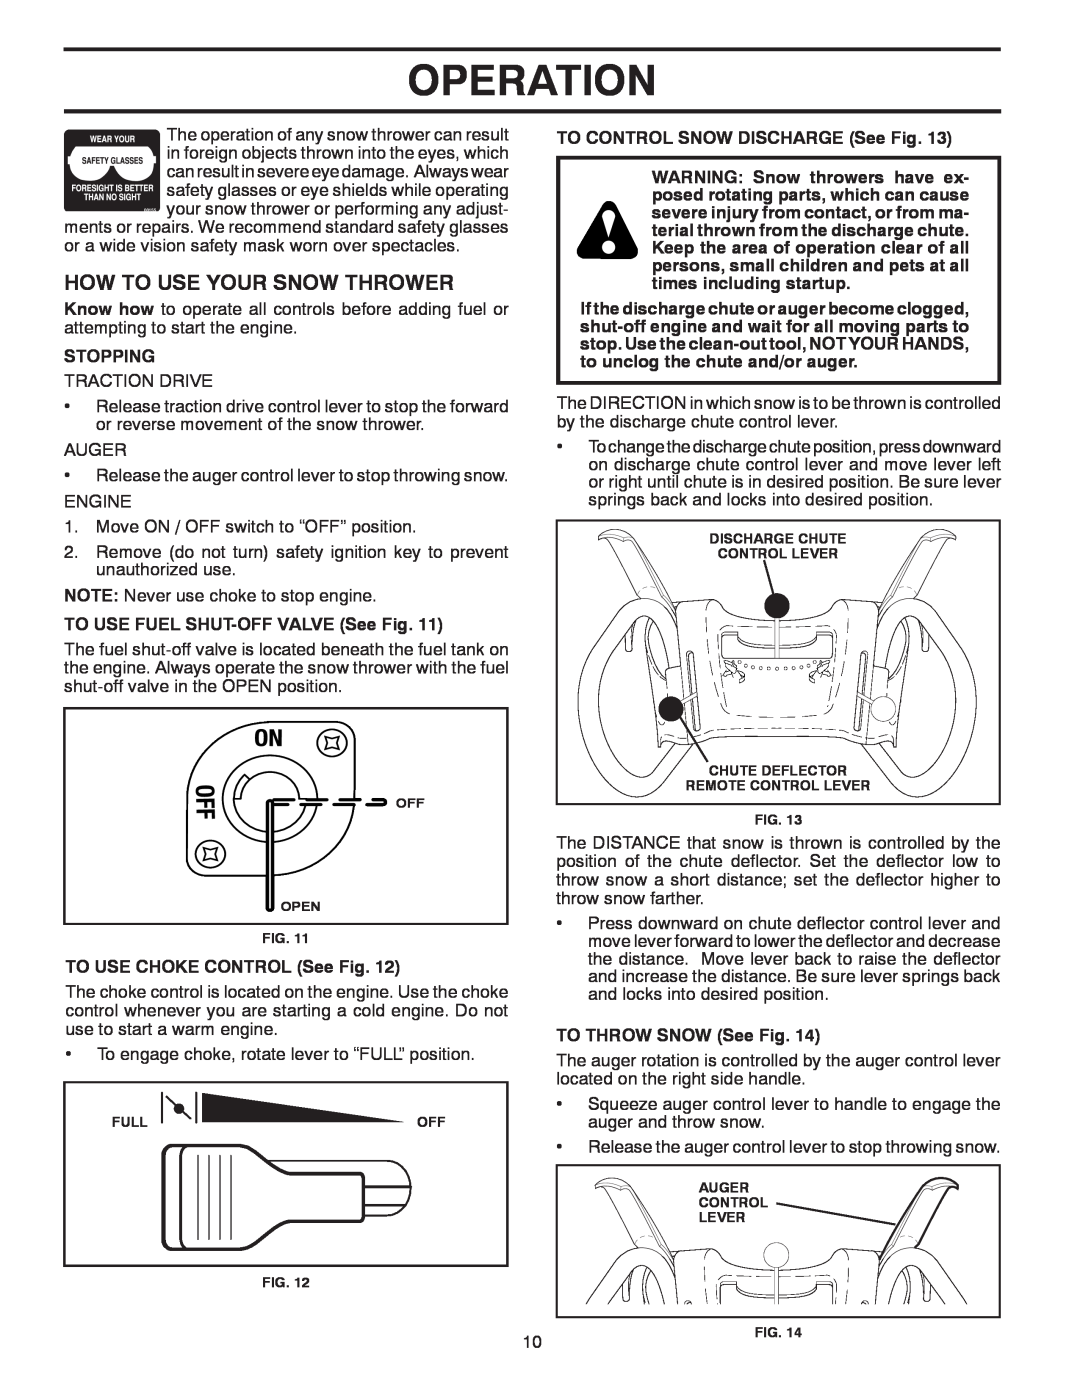 Poulan PP414EPS30 owner manual How To Use Your Snow Thrower, Operation, Stopping, TO USE FUEL SHUT-OFFVALVE See Fig 